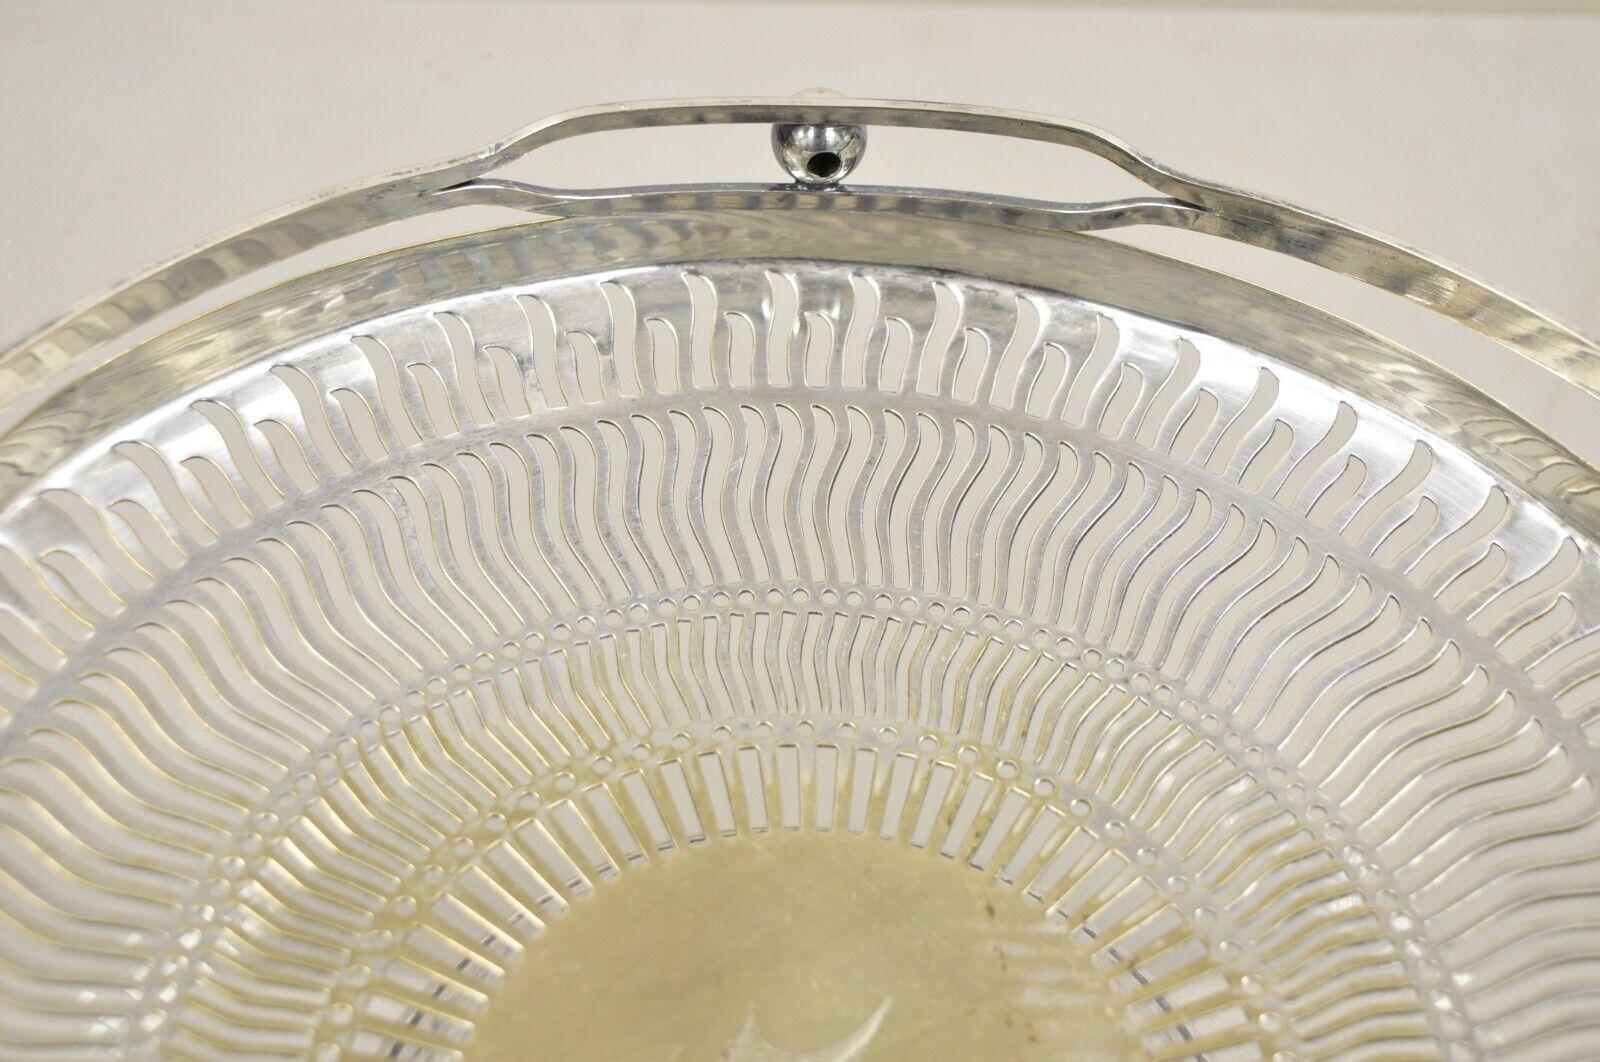 Apollo Sheffield USA Silver Plated Nickel Silver Reticulated Basket w Handle In Good Condition For Sale In Philadelphia, PA